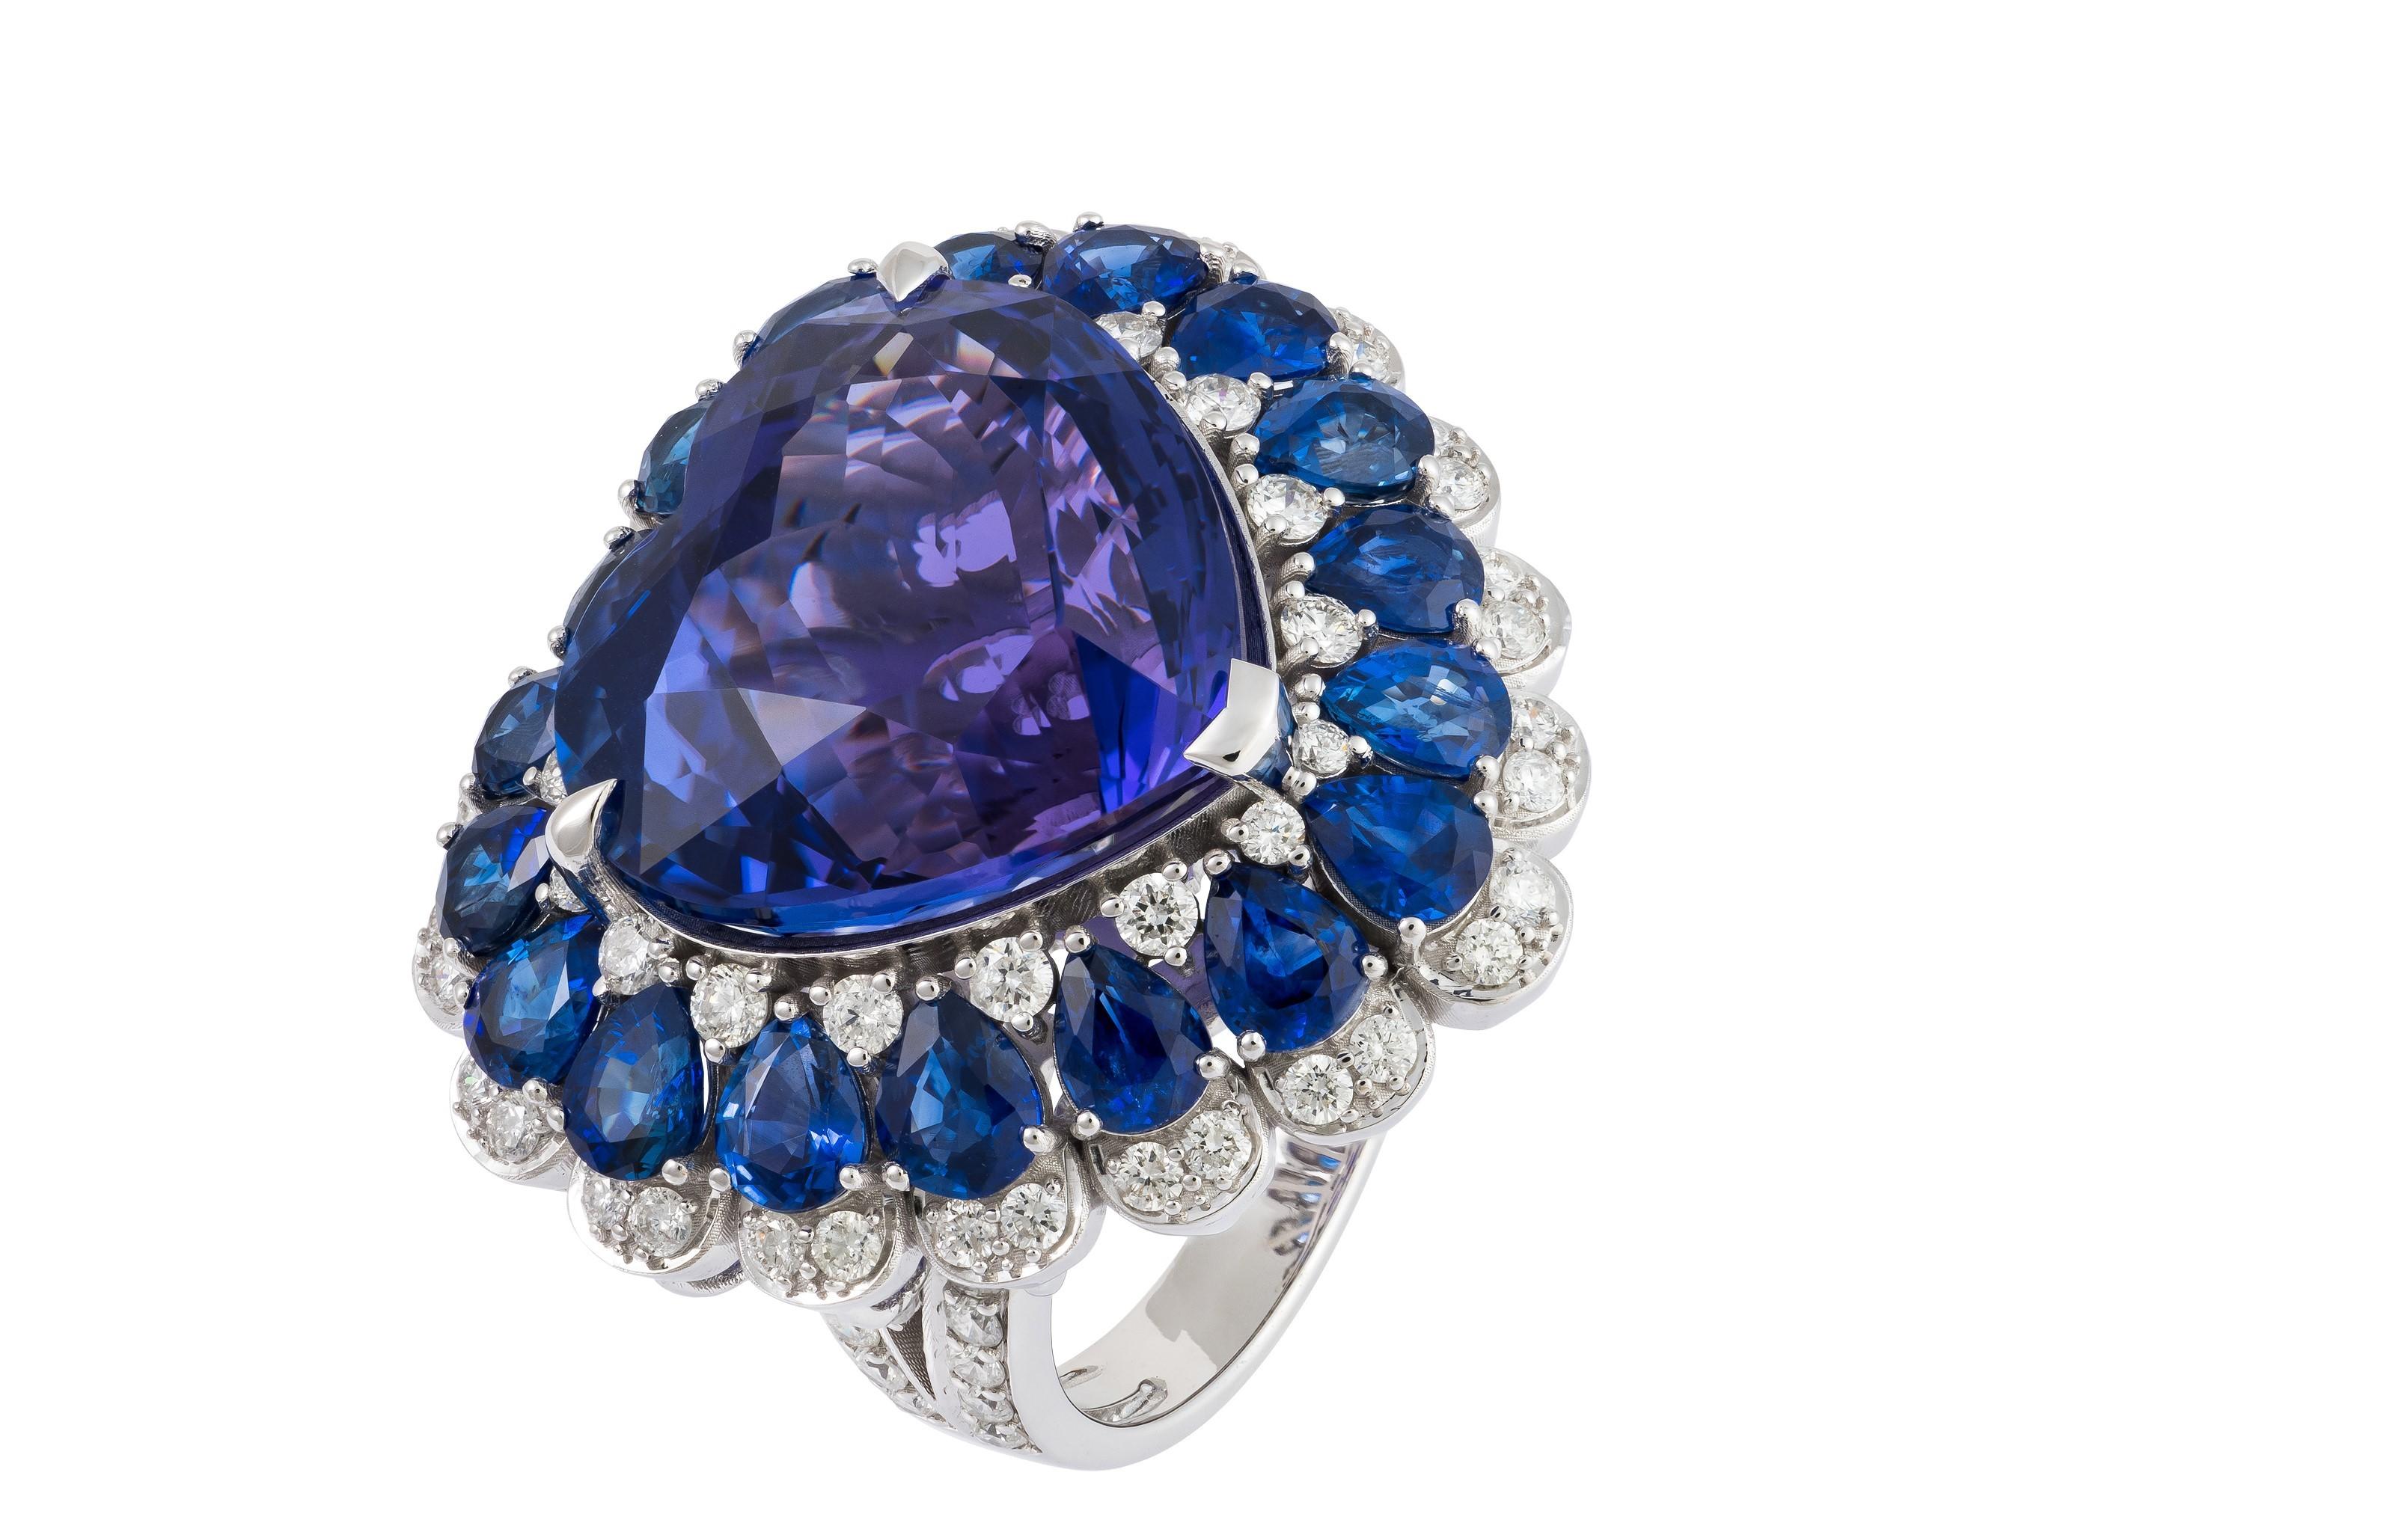 The Following Item we are offering is a Rare Important Spectacular and Brilliant 18KT Gold Large Gorgeous Tanzanite Heart Sapphire Diamond Ring. Ring consists of a Rare Fine Magnificent Rare Tanzanite Heart surrounded with a Gorgeous Halo of Blue